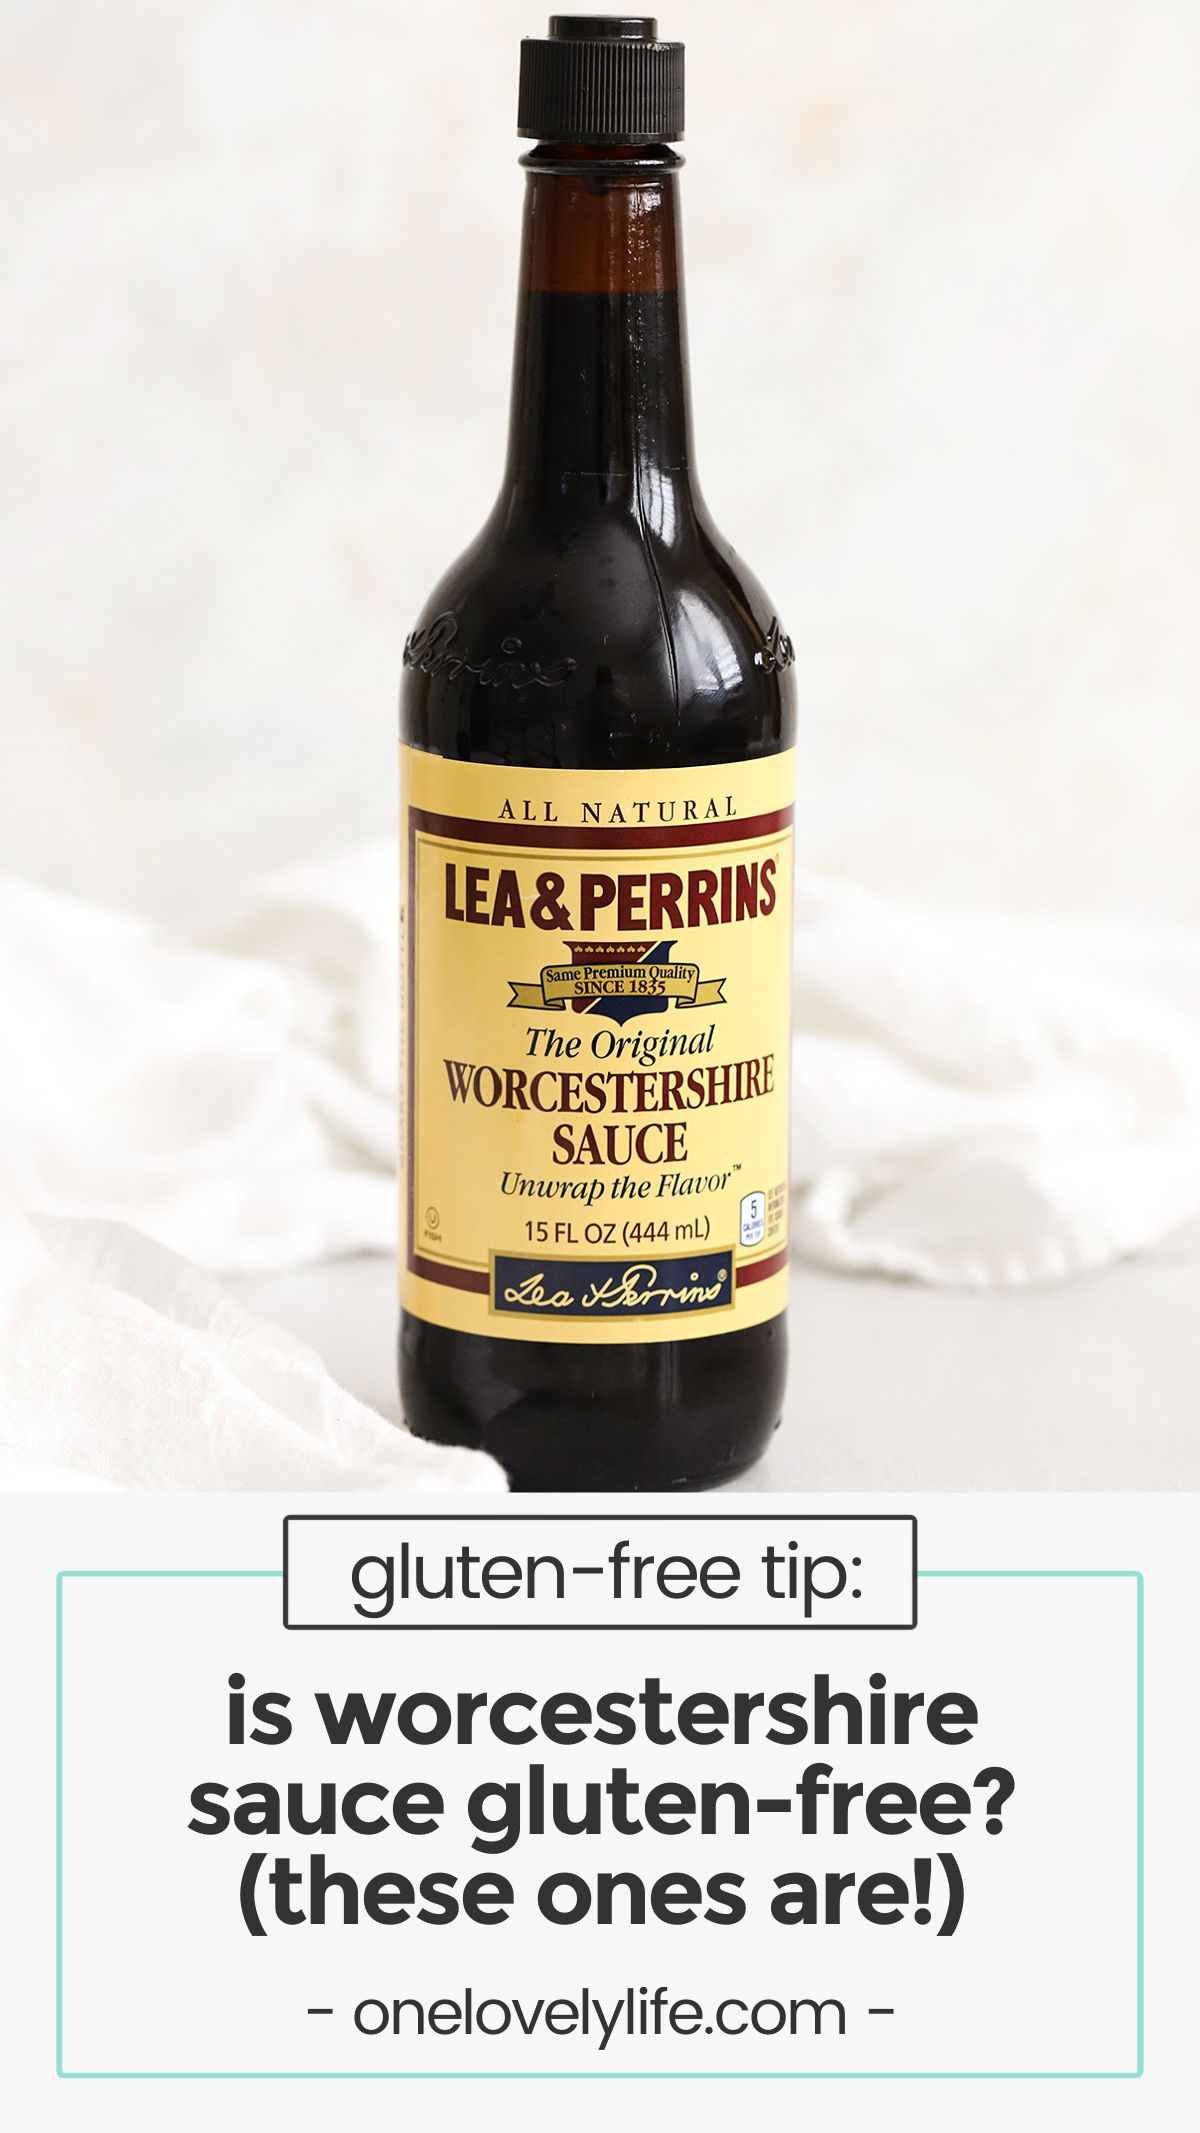 Is Worcestershire Sauce Is Gluten-Free? We're Sharing Brands Of Gluten-Free Worcestershire Sauce, Ingredients To Watch Out For & More! // gluten-free worcestershire sauce brands / gluten-free worcestershire / is lea & perrins gluten-free / is lea and perrins worcestershire sauce gluten-free / homemade gluten-free worcestershire sauce / gluten free tips /